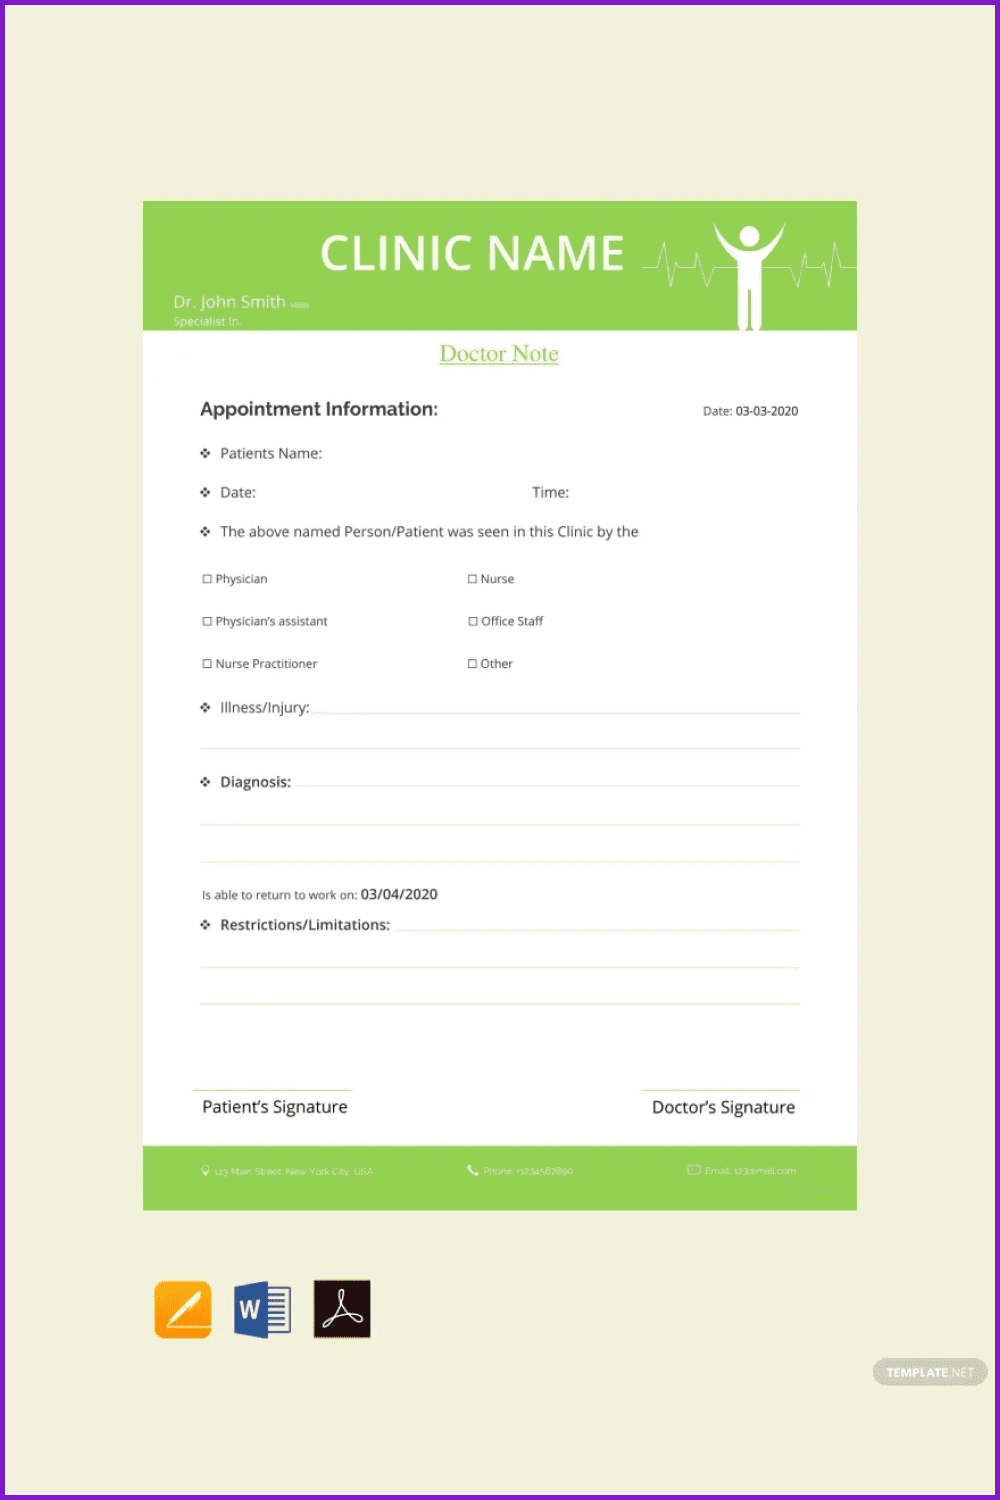 Editable Sample Doctor Note Template.